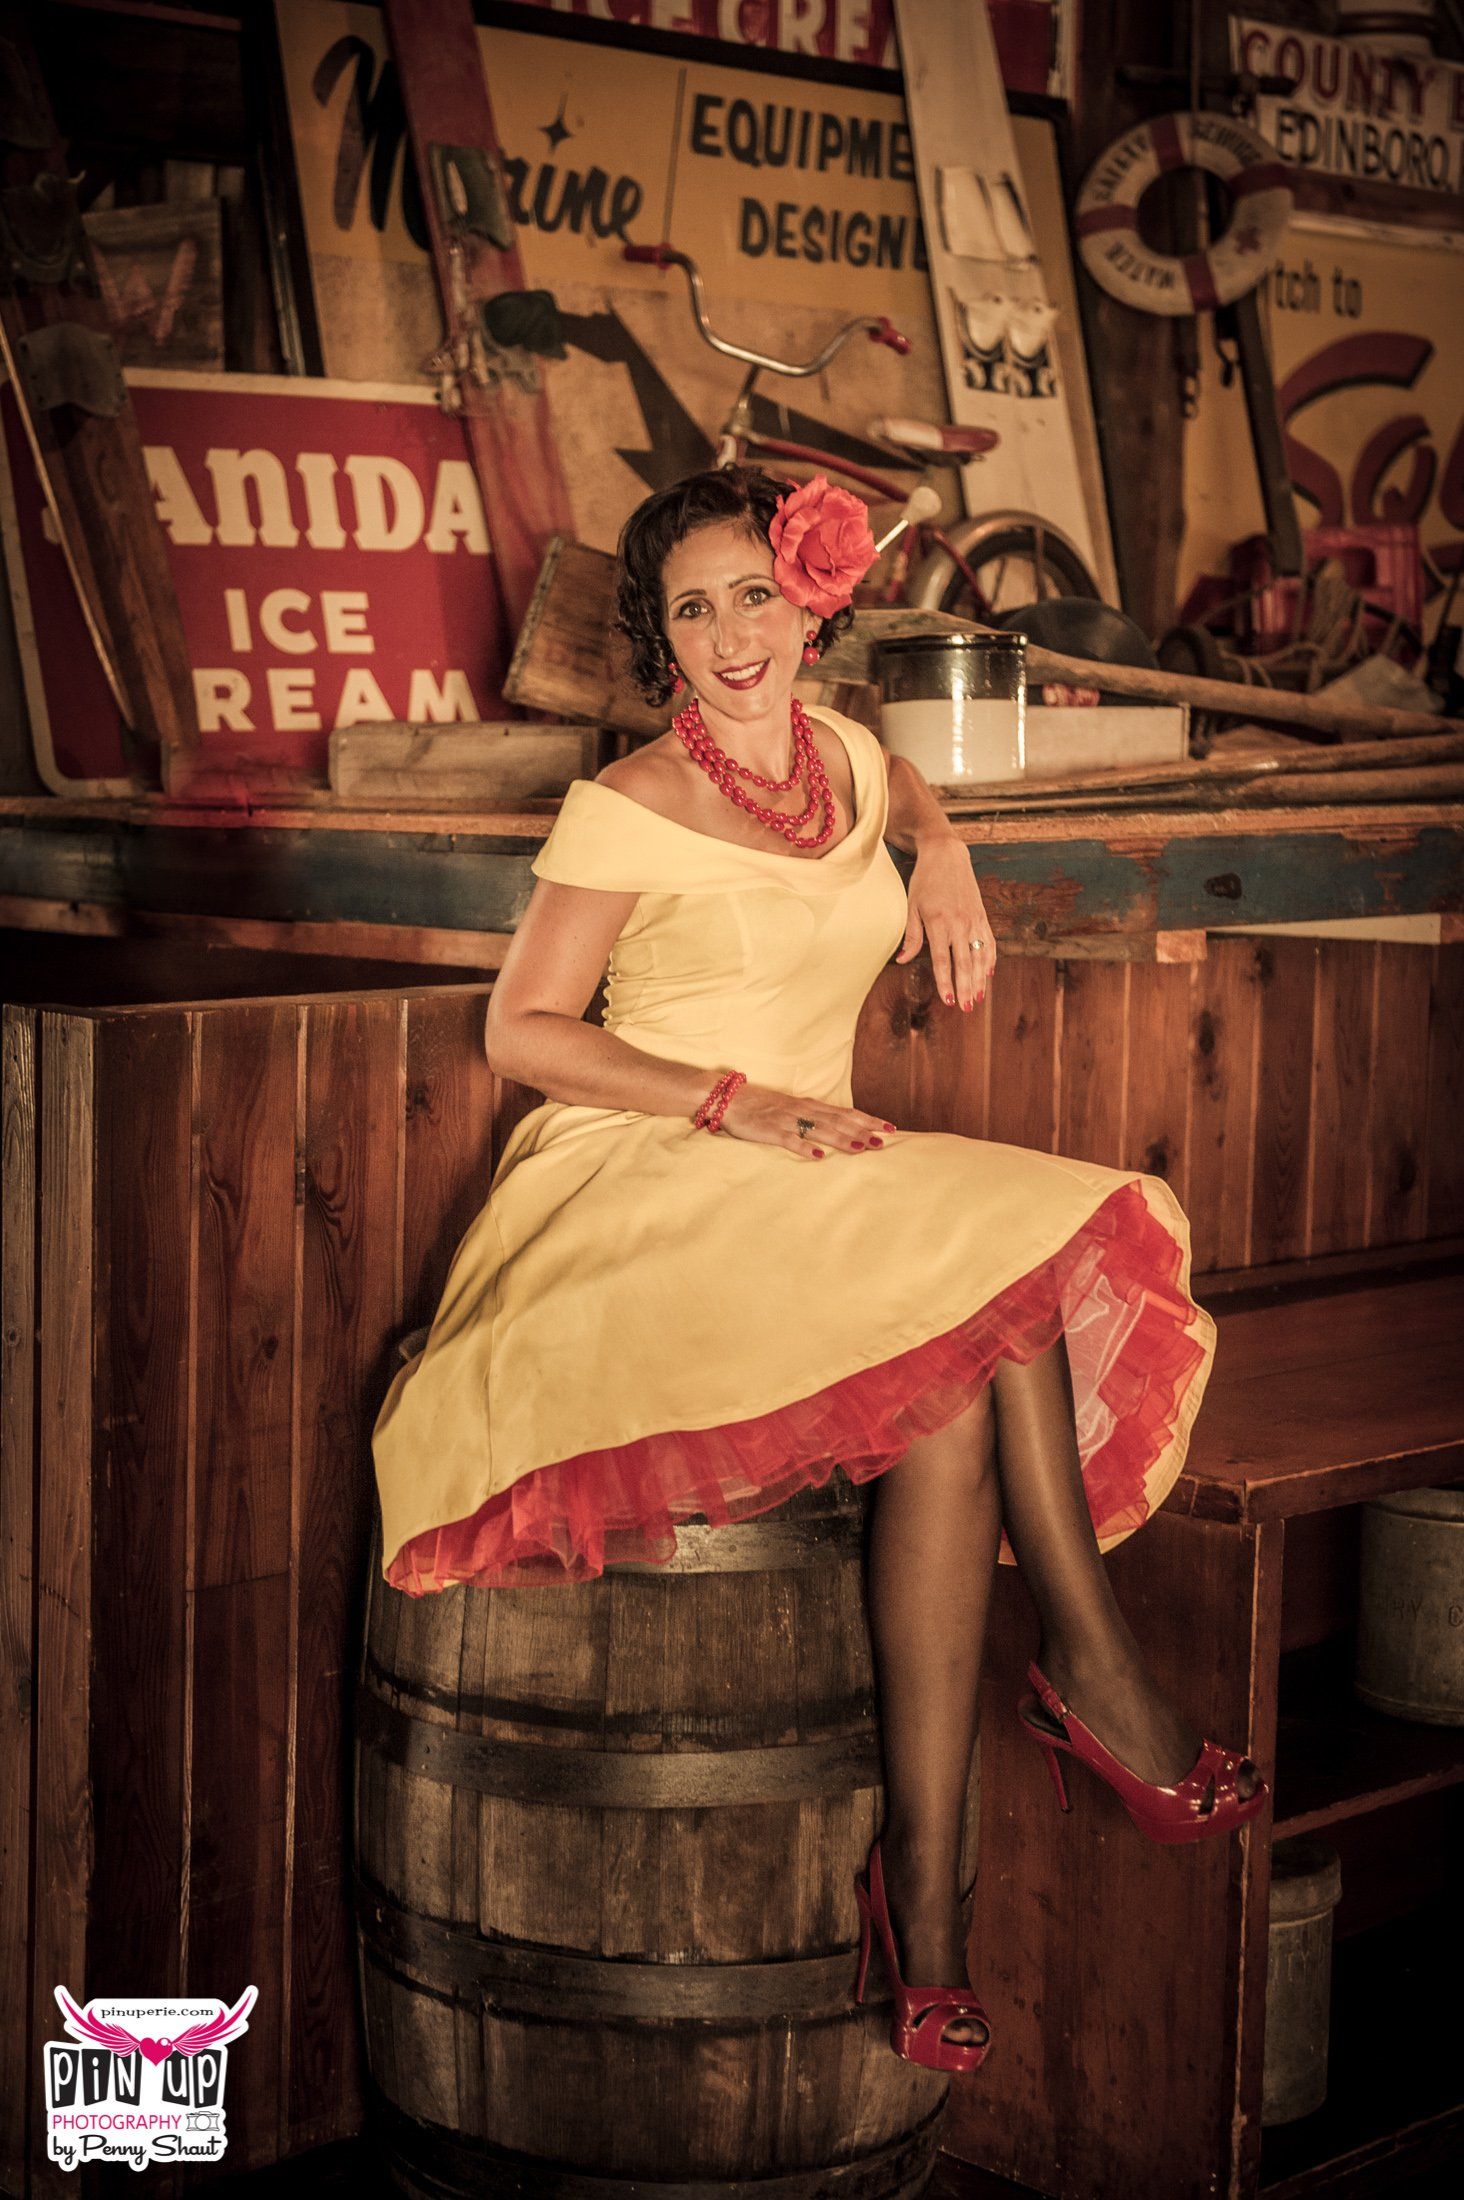 a woman in a yellow dress is sitting on a wooden barrel .